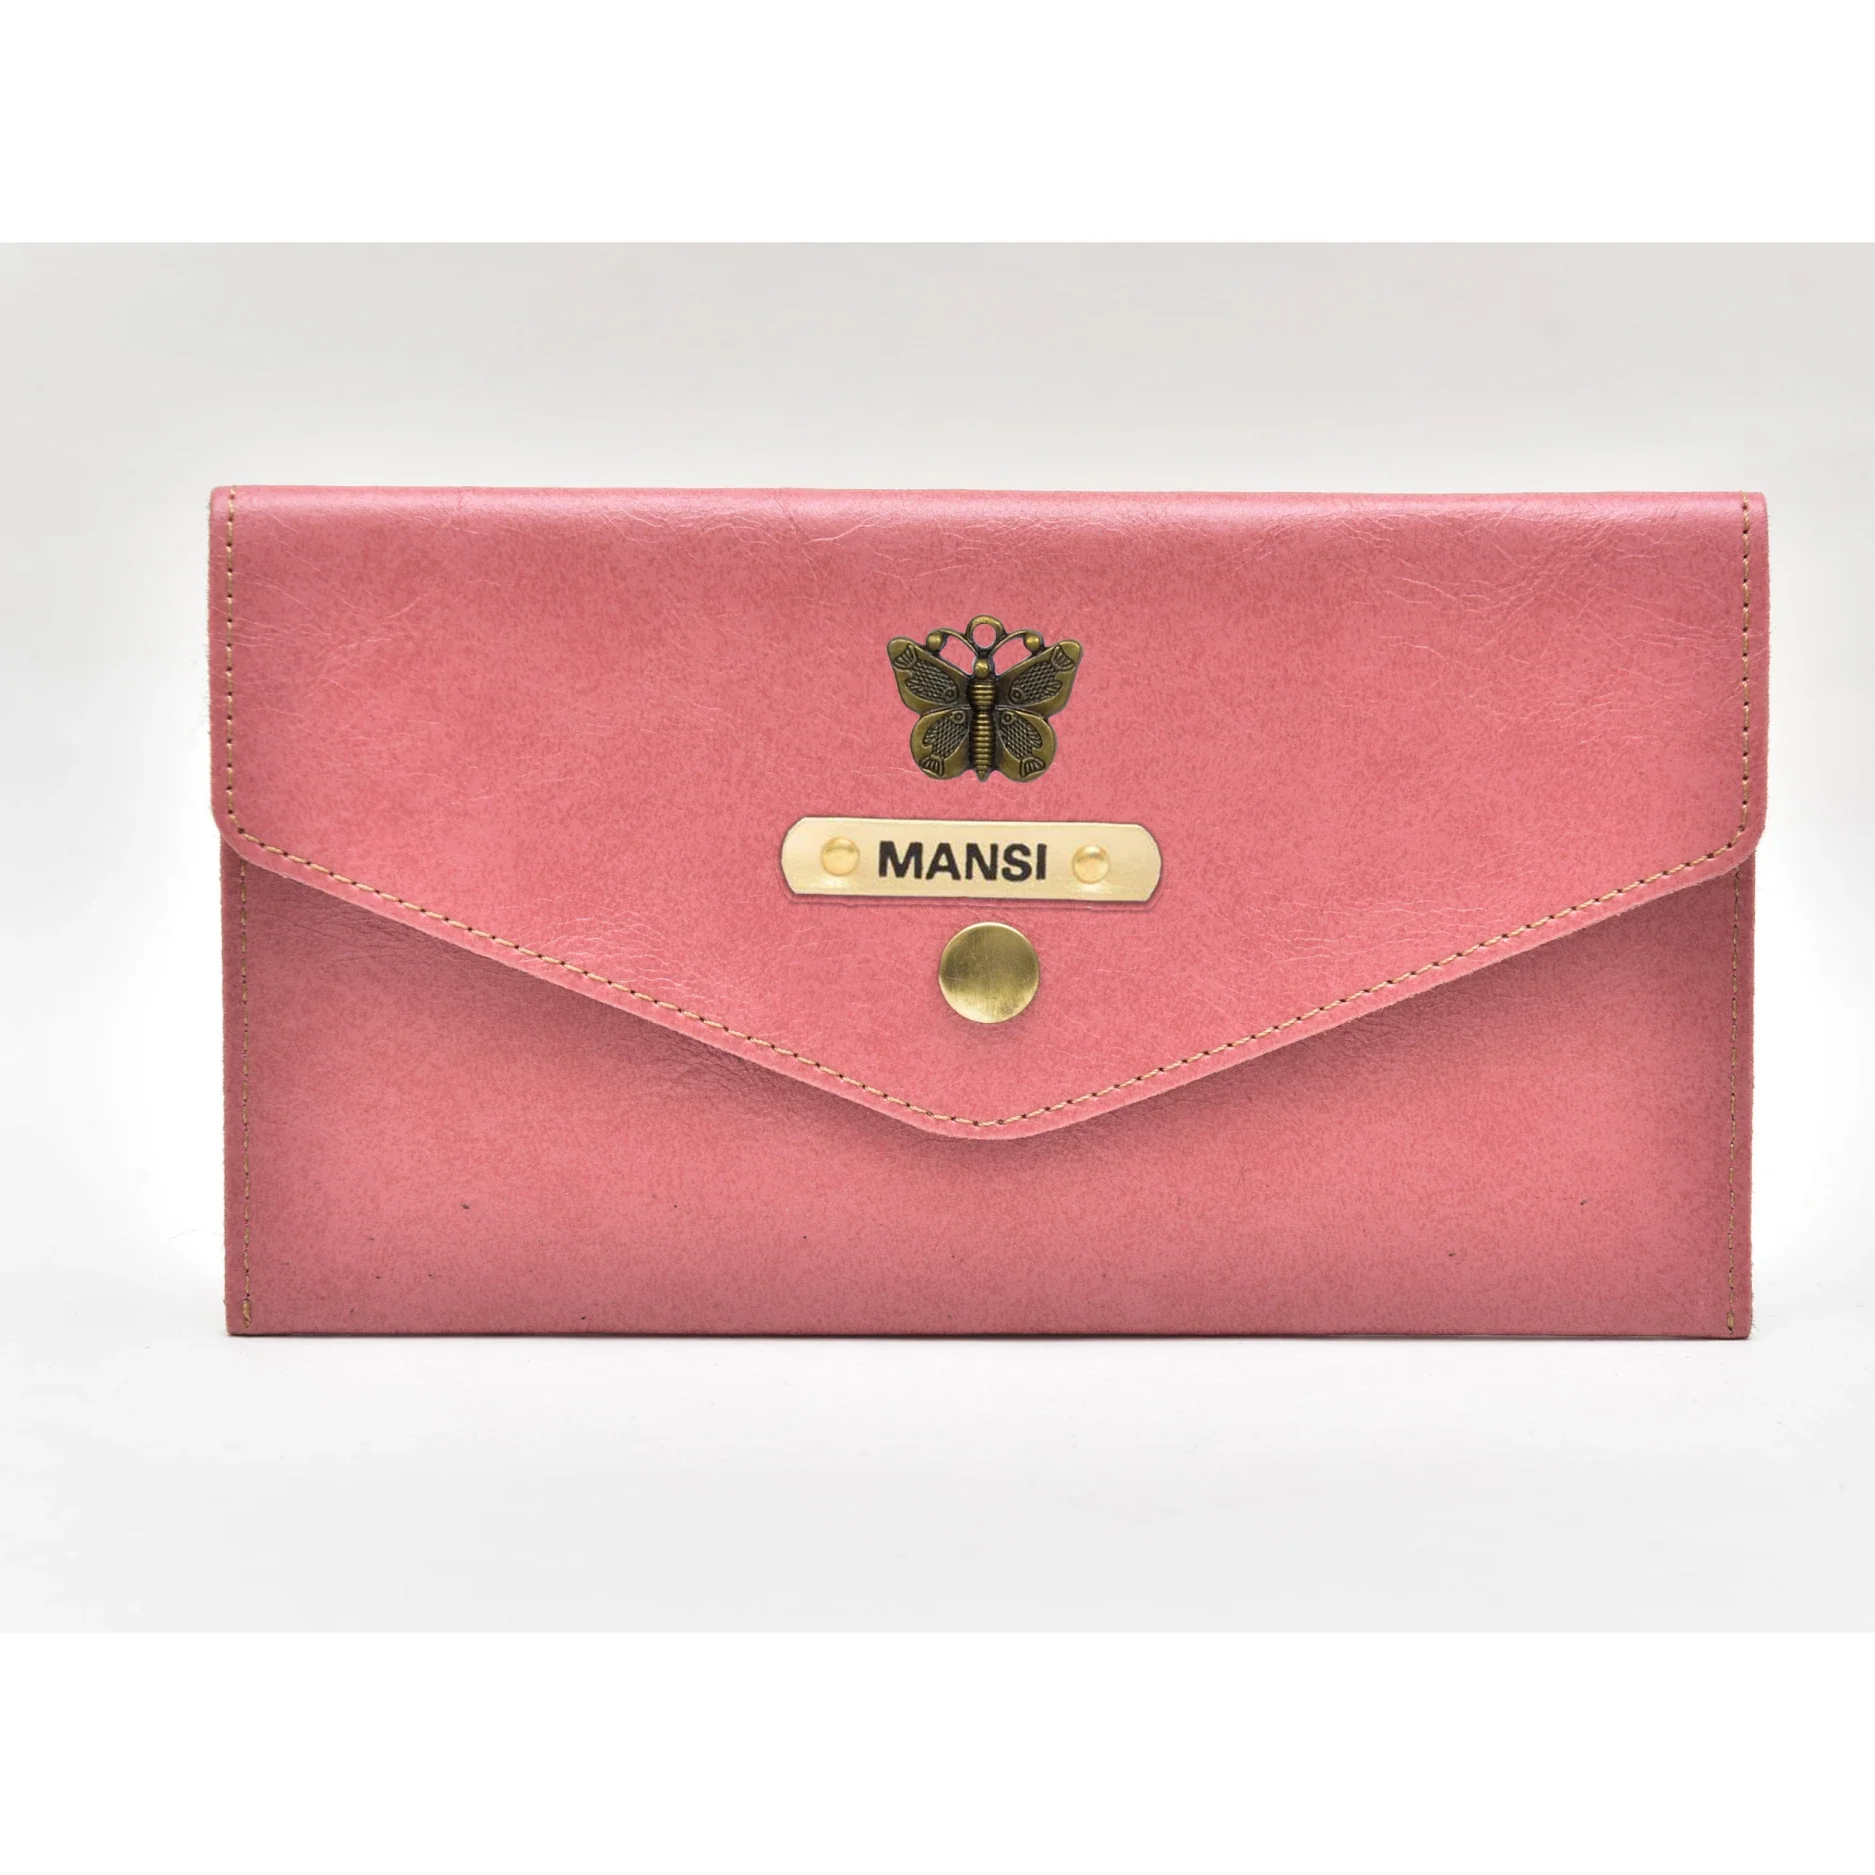 Practical and stylish, this personalized clutch is perfect for any occasion. With multiple color options and customization choices, make it a reflection of your personality.